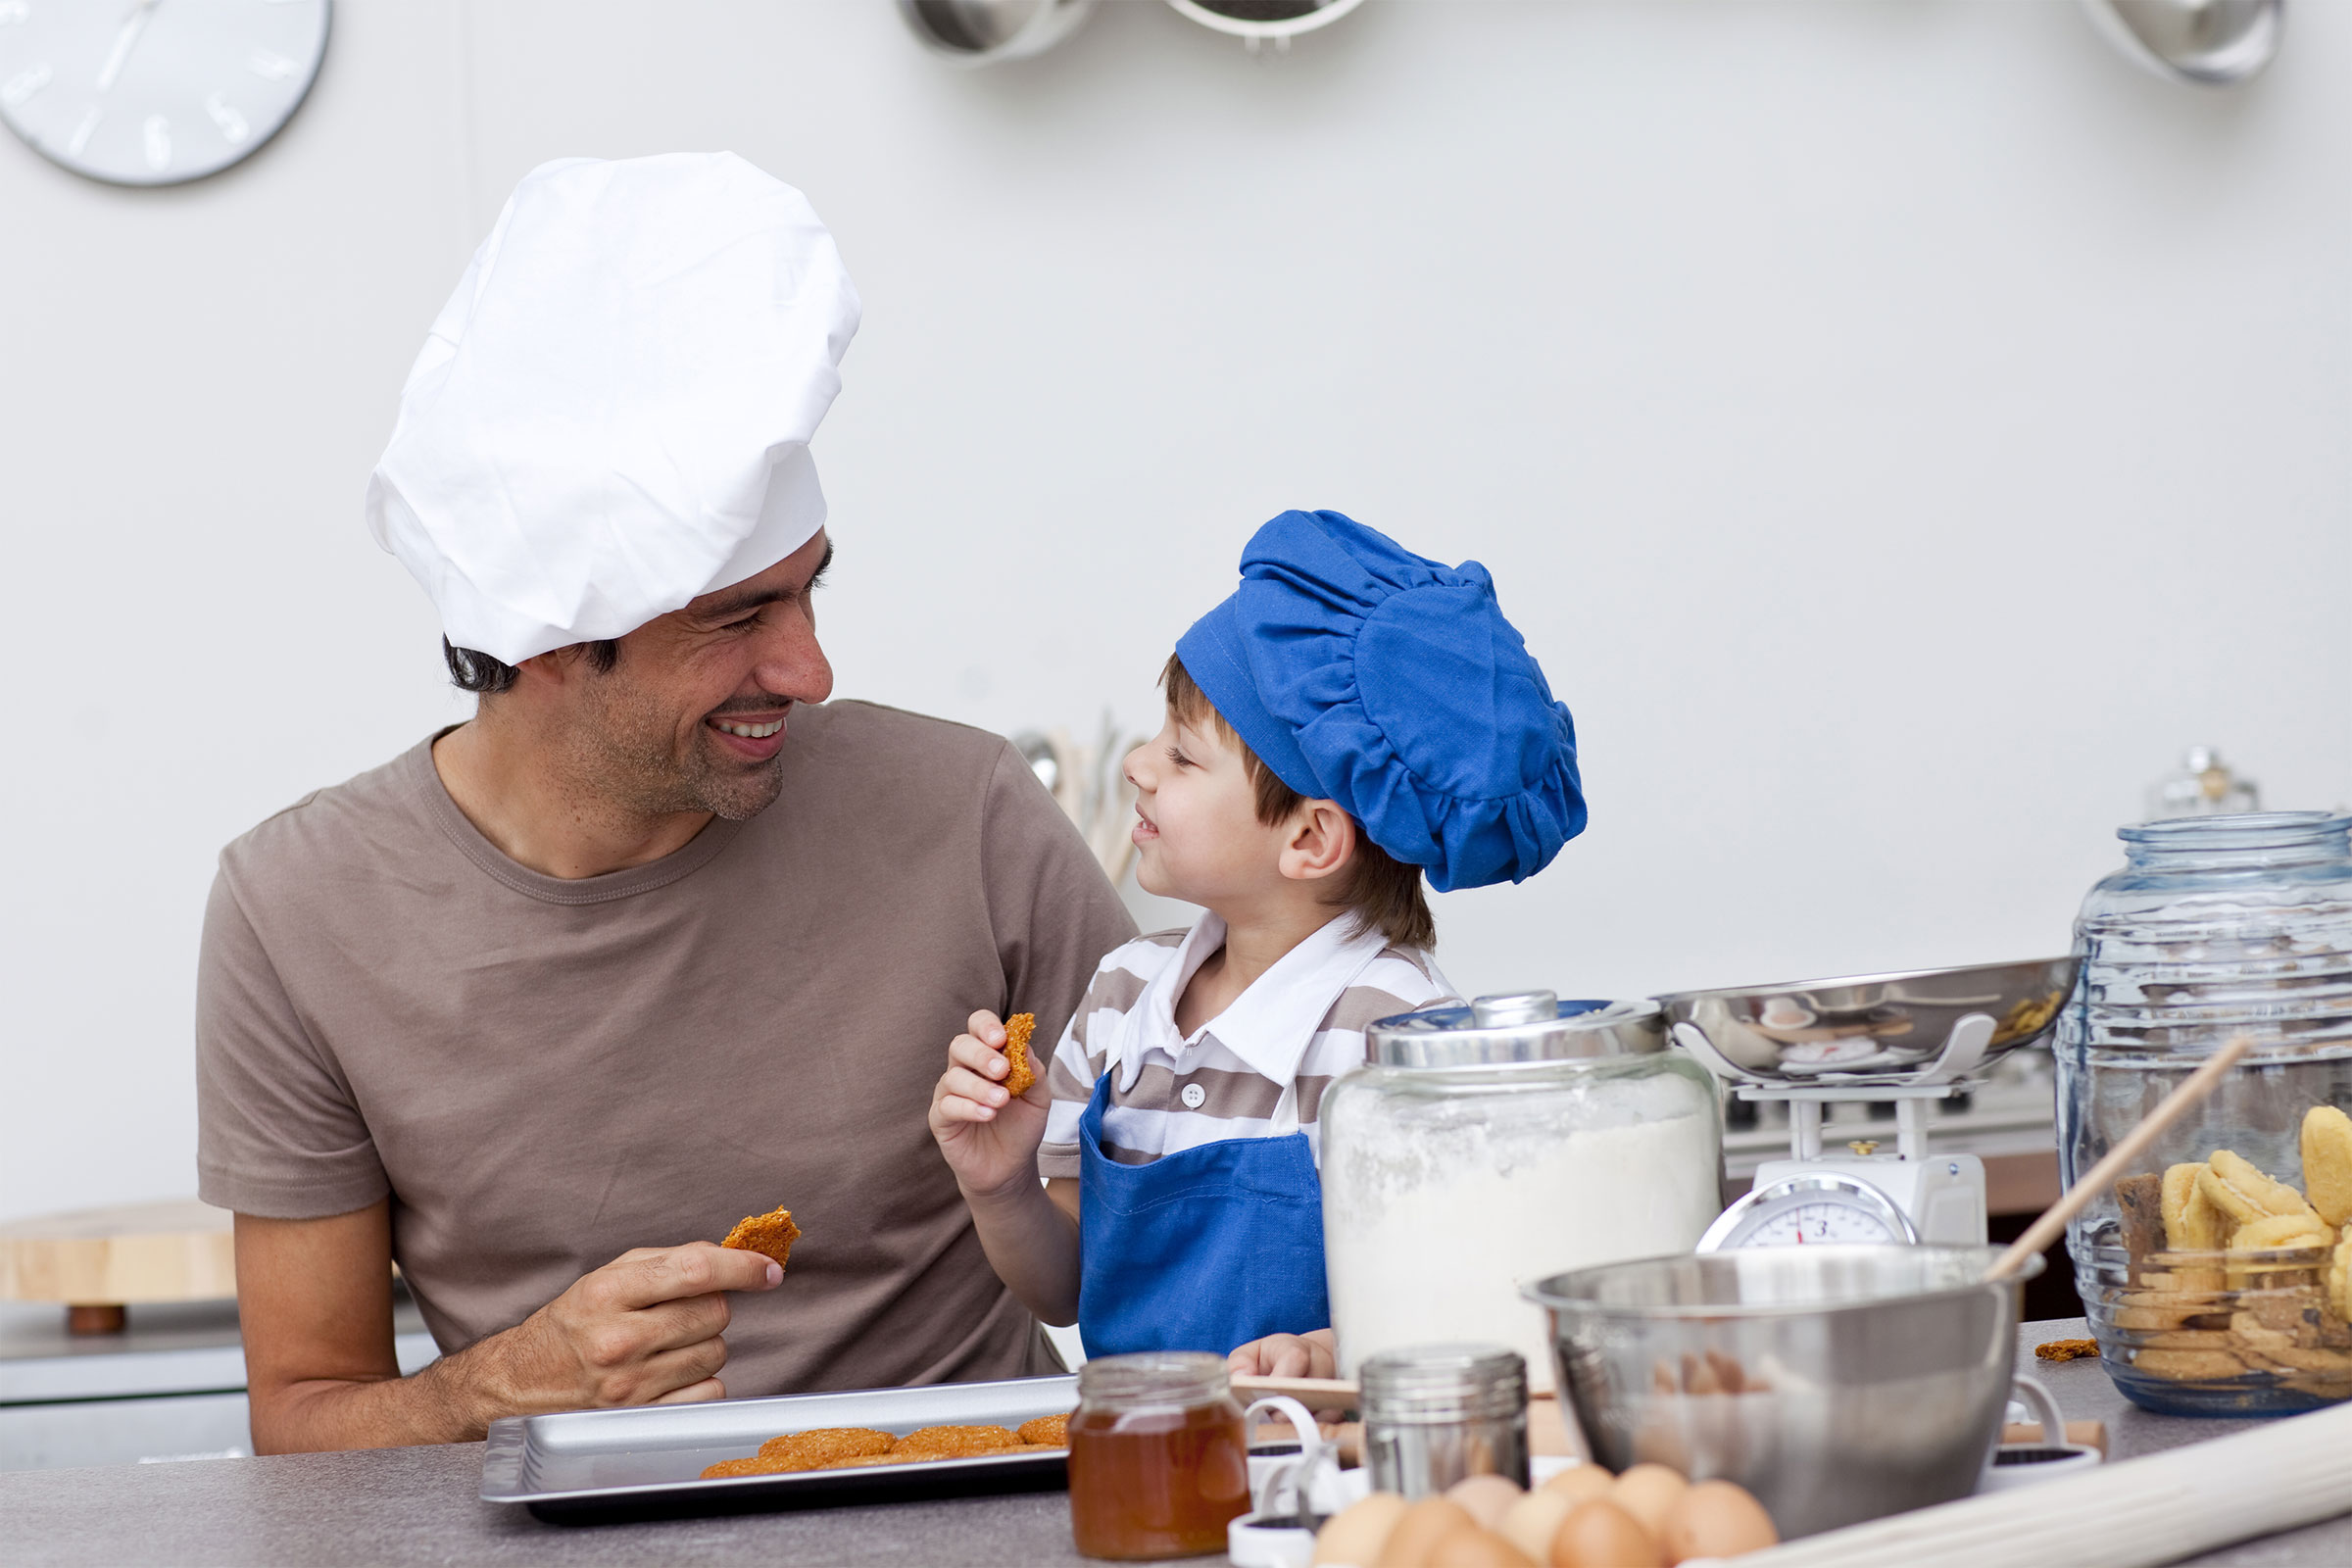 Child and parent cooking